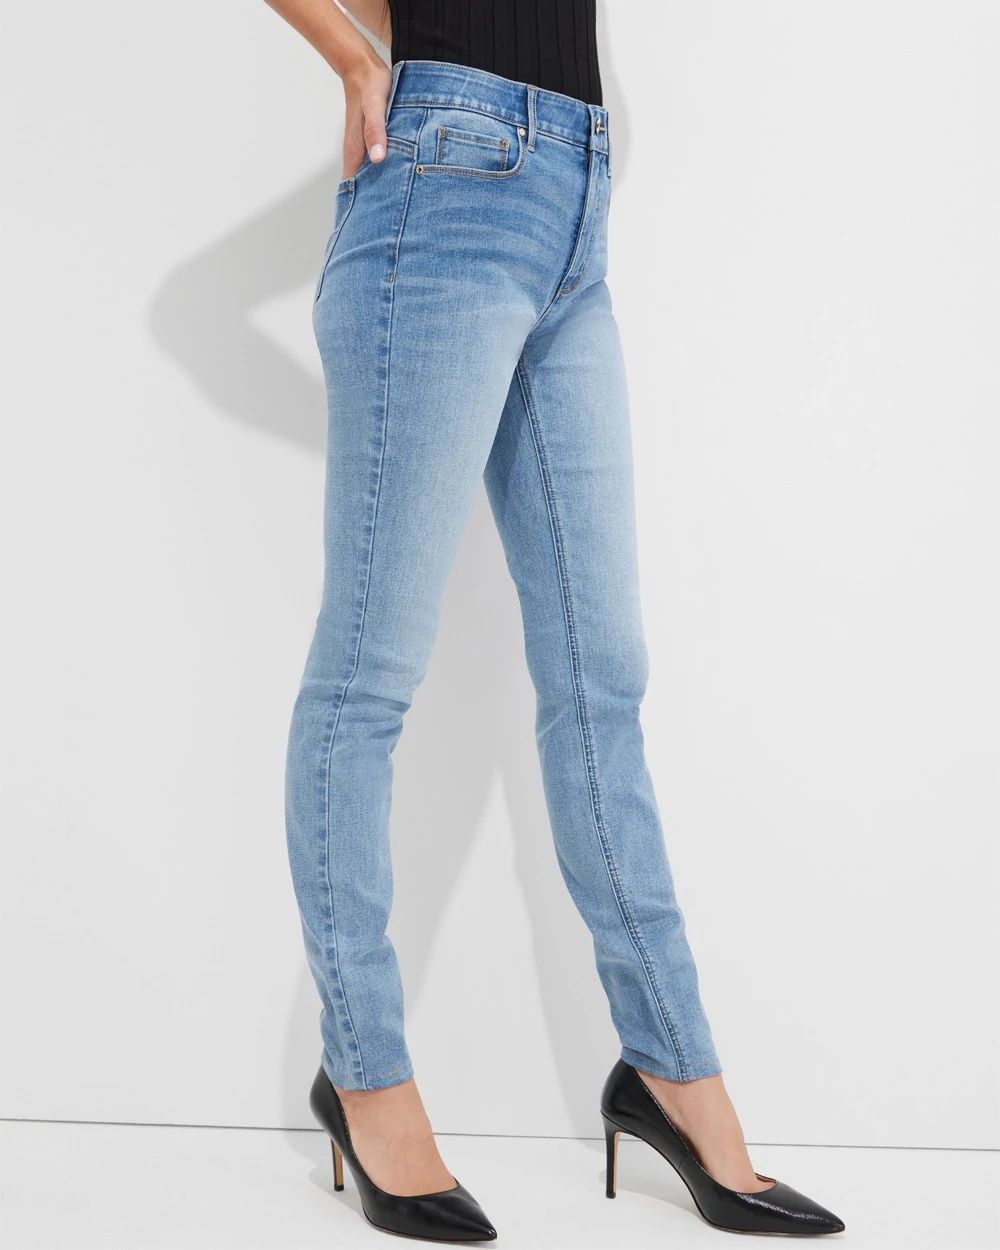 Outlet WHBM High Rise Skinny Jeans click to view larger image.